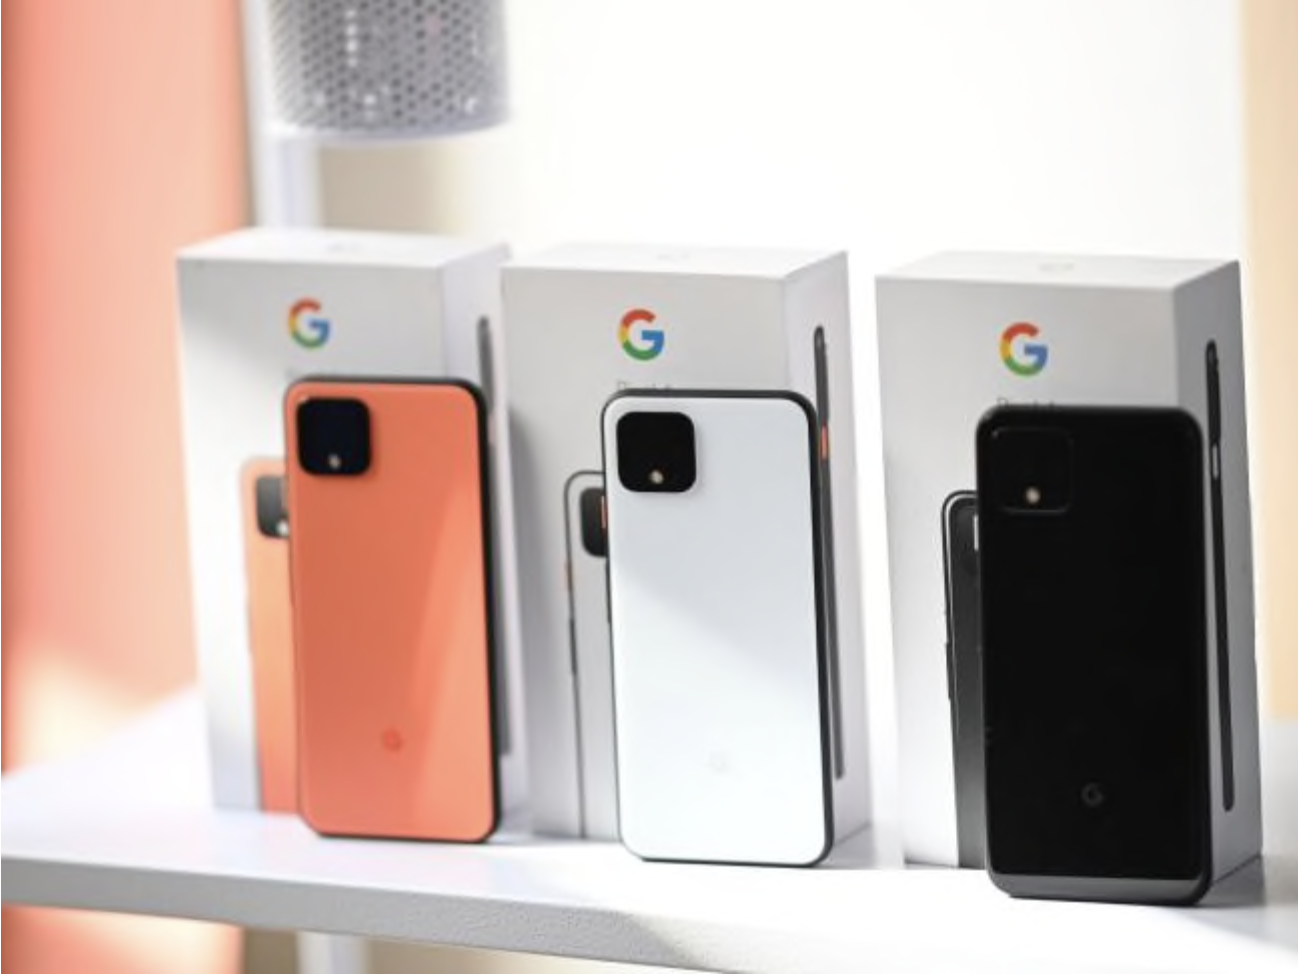 The new Google Pixel 4 phone is on display during a Google product launch event called Made by Google 19 on October 15, 2019 in New York City. Picture: AFPSource:AFP